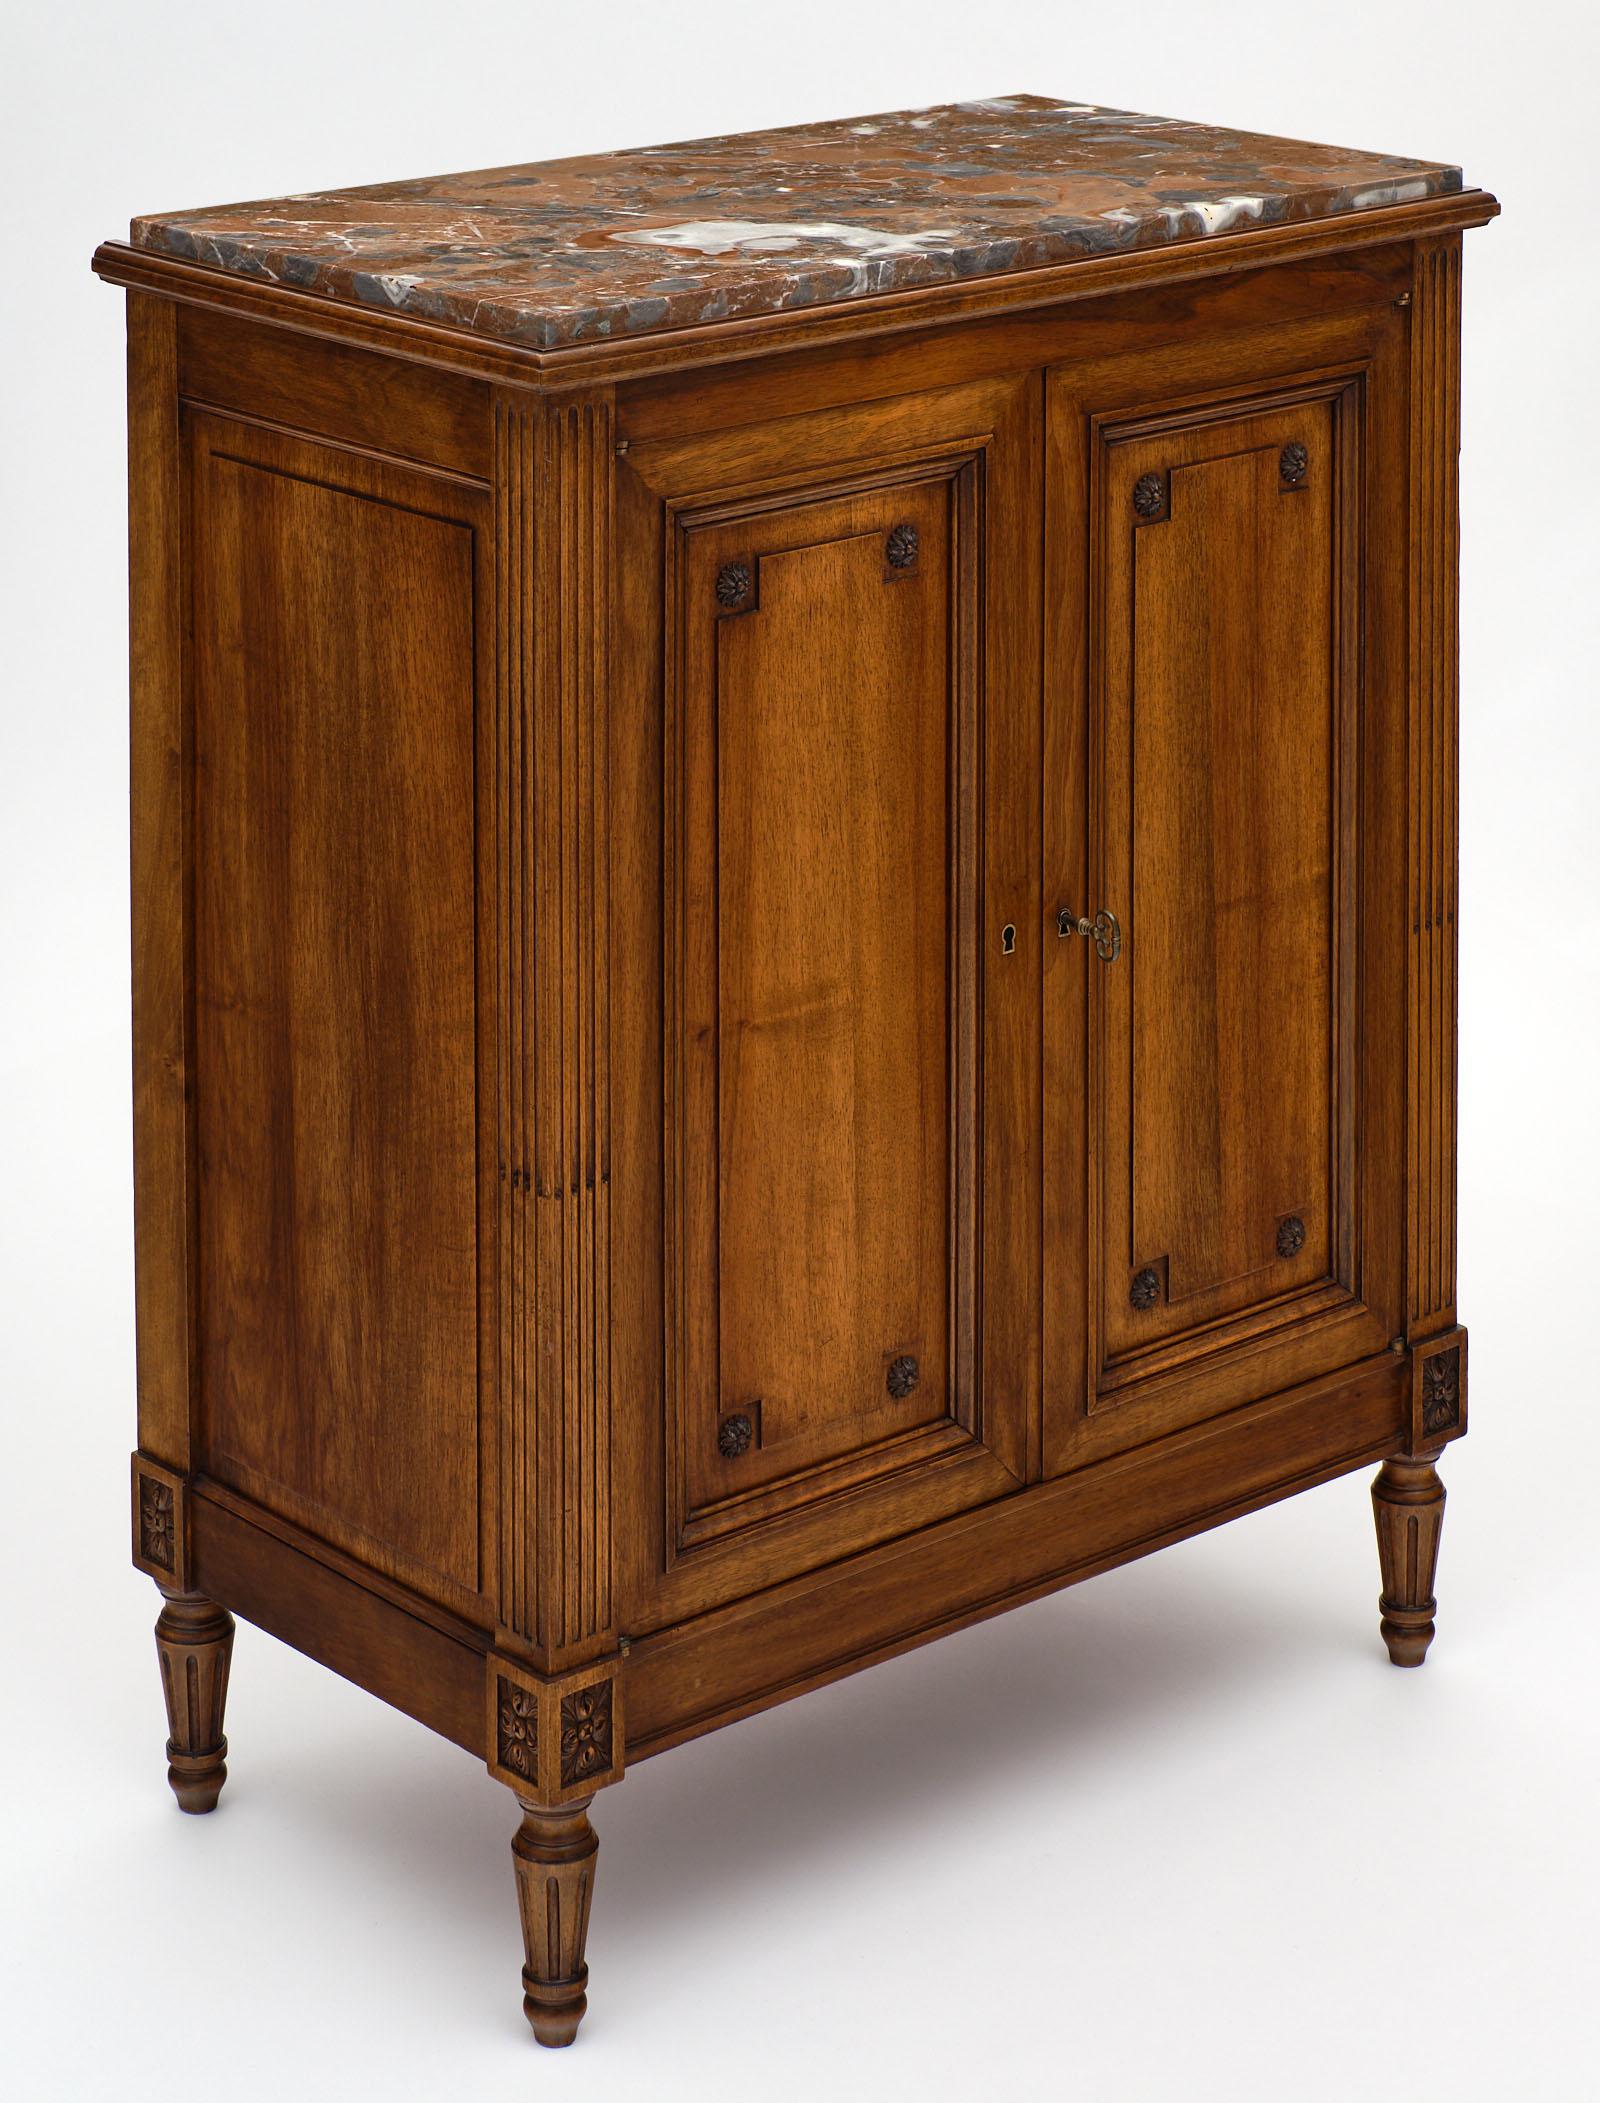 Louis XVI style “argentier” with marble top. This charming, solid walnut cabinet opens to reveal three dovetailed drawers and is accented by a beautiful brêche marble top. A very tightly built “argentier” meant originally to contain silverware.